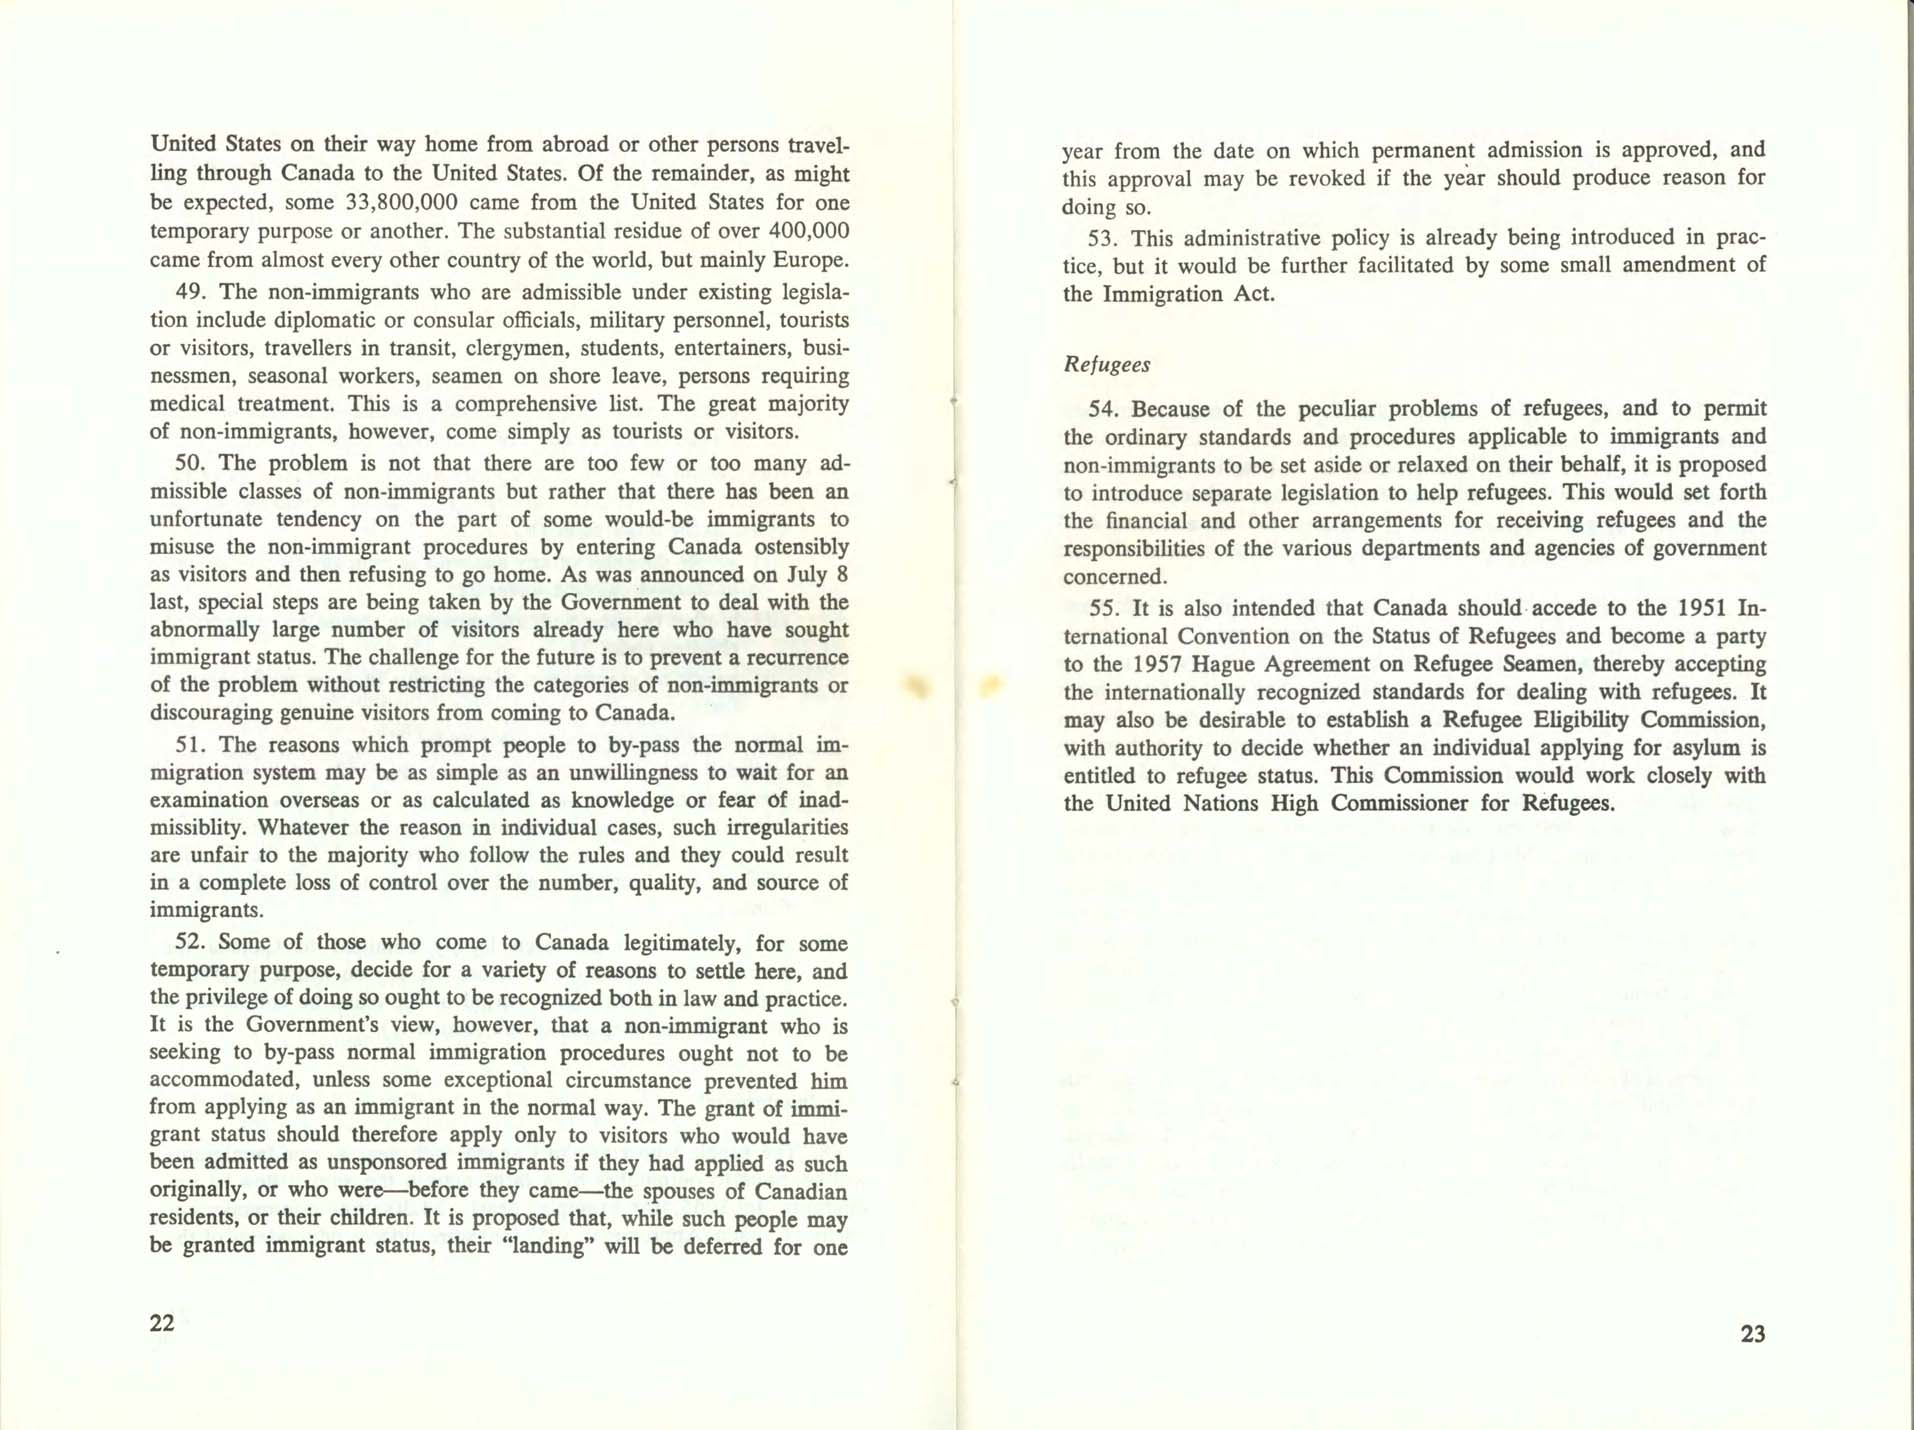 Page 22, 23 White Paper on Immigration, 1966